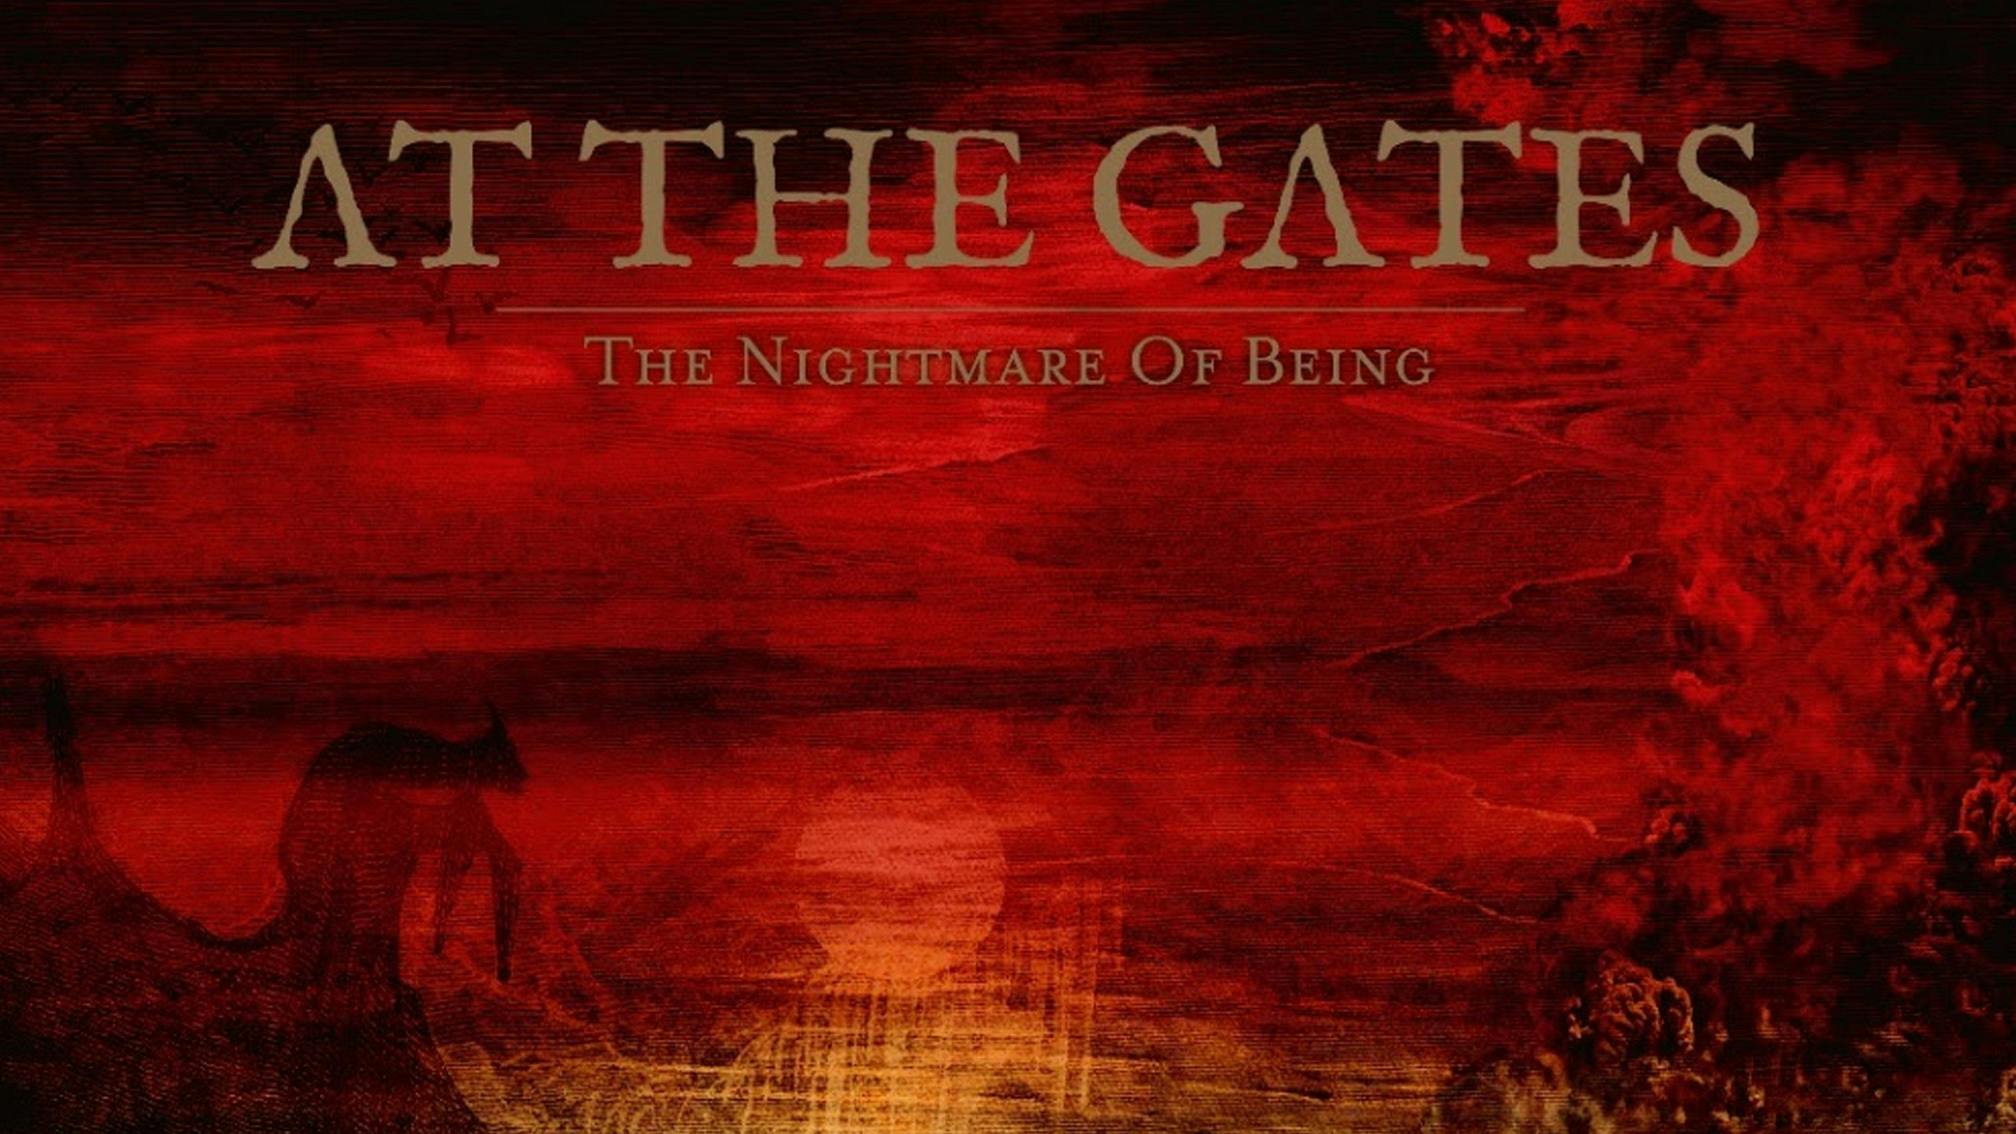 At The Gates announce new album, The Nightmare Of Being